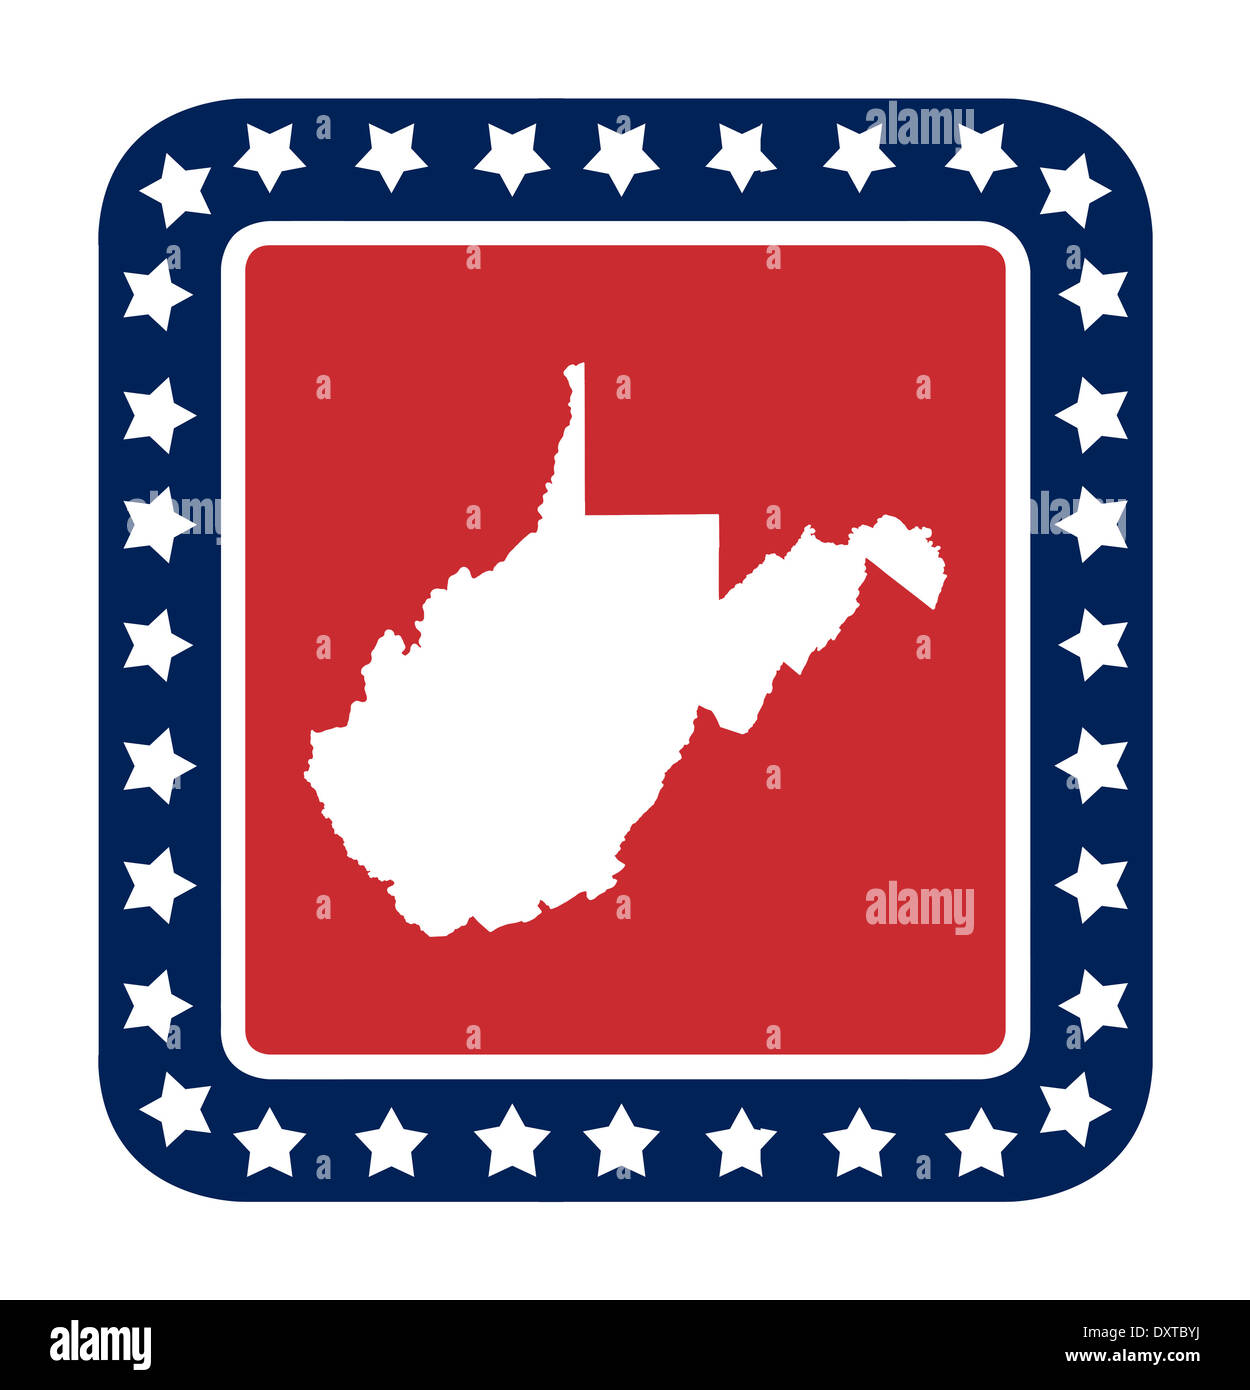 West Virginia state button on American flag in flat web design style, isolated on white background. Stock Photo